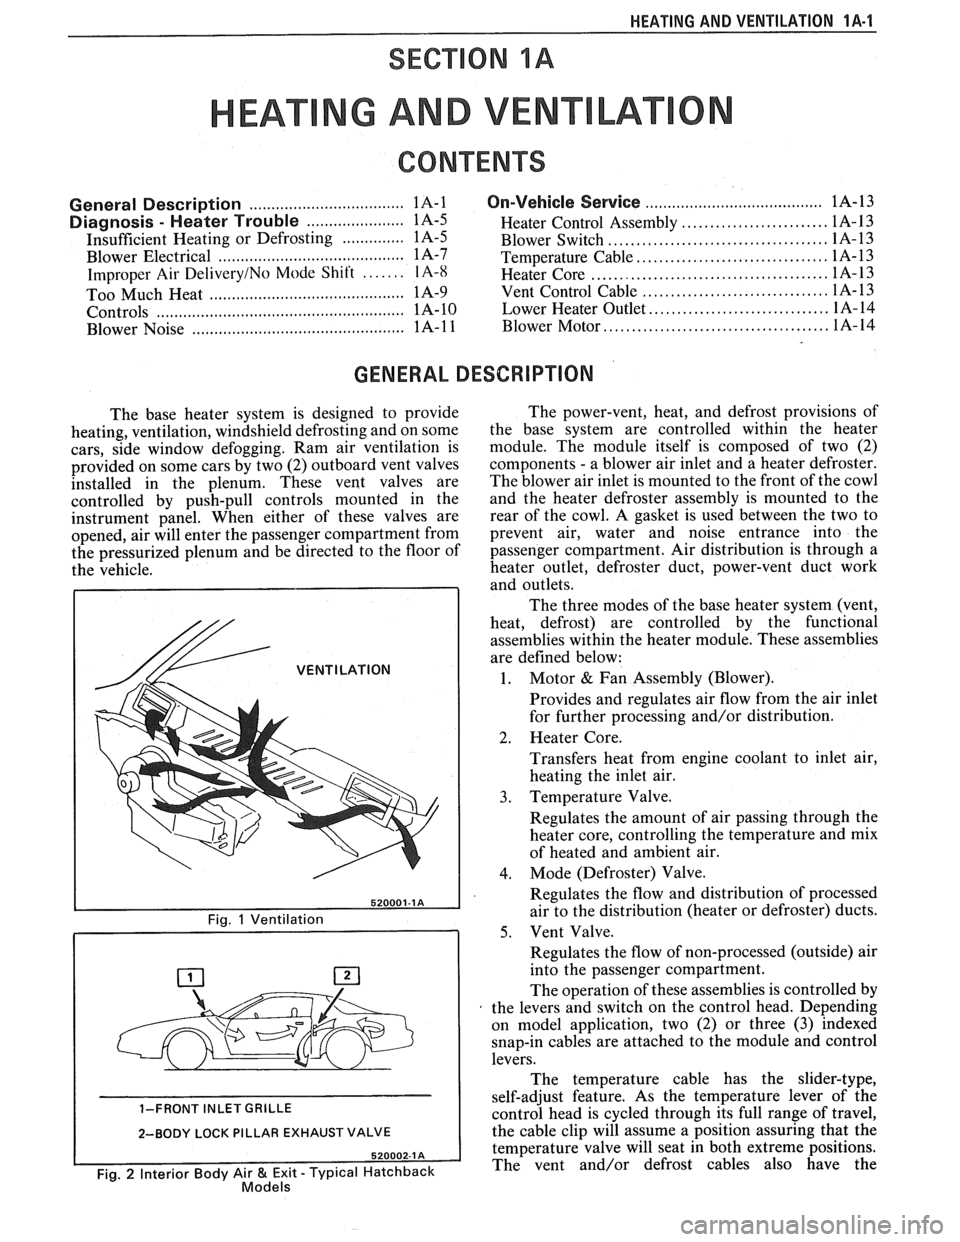 PONTIAC FIERO 1988  Service Repair Manual 
HEATING AND VENTILATION 1A-1 
SECTION 1A 
NG AND VENT 
CONTENTS 
General Description ................................. 1A-1 
Diagnosis - Heater  Trouble ...................... 1A-5 
Insufficient  Hea